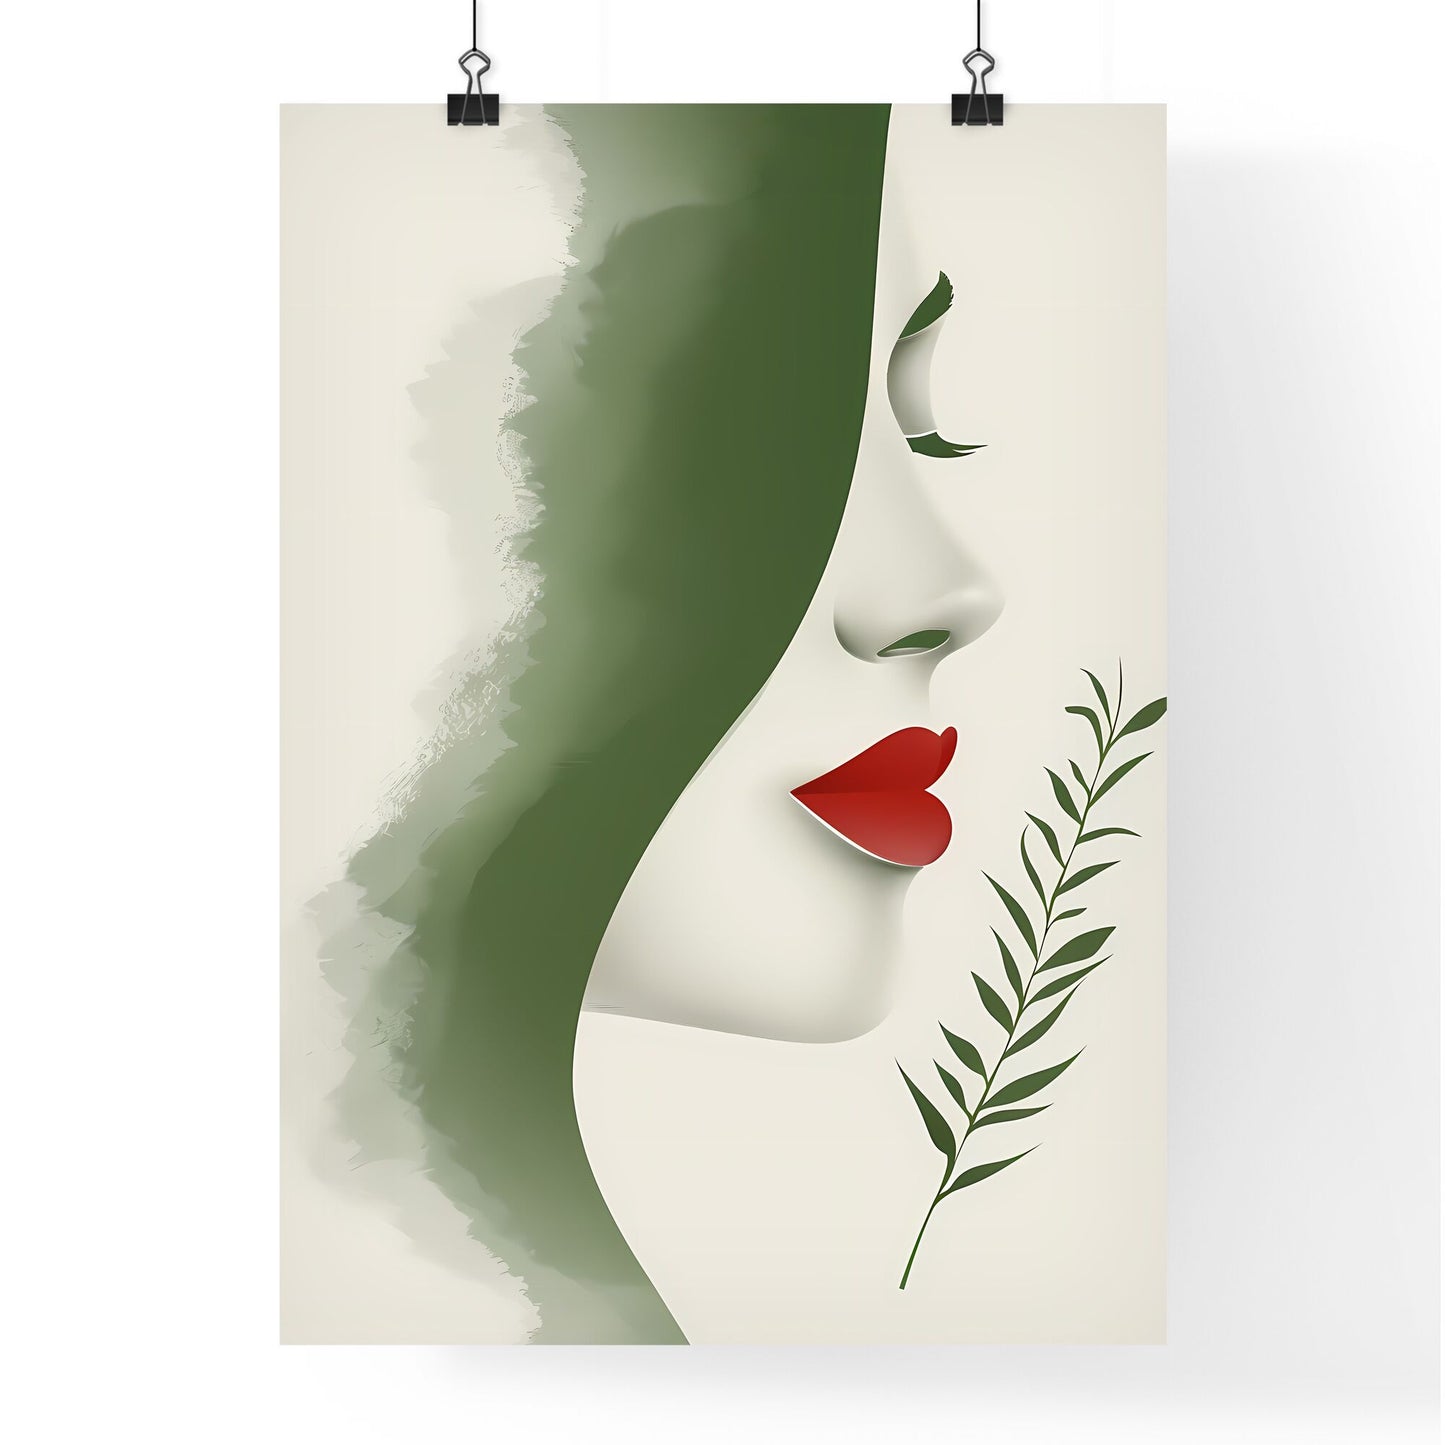 Green logo with white womans face. Domestic intimacy, minimalism, vibrant art focus. Magenta accents, playful animation, distinctive noses. Romantic emotivity. Default Title